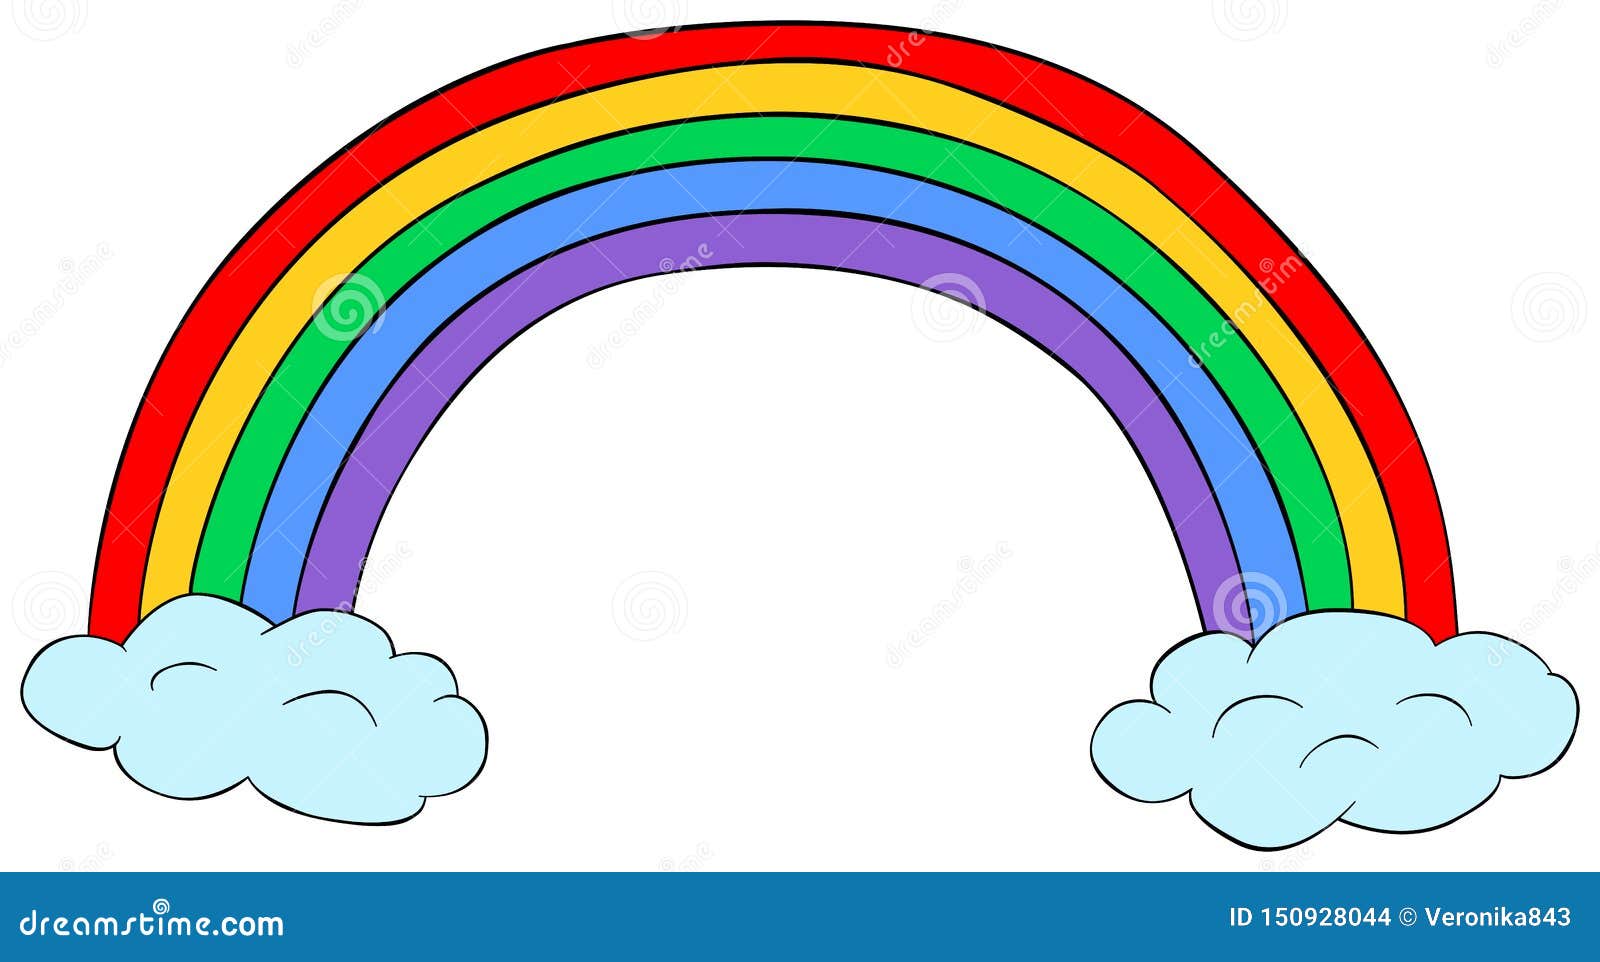 rainbow with clouds clipart.  